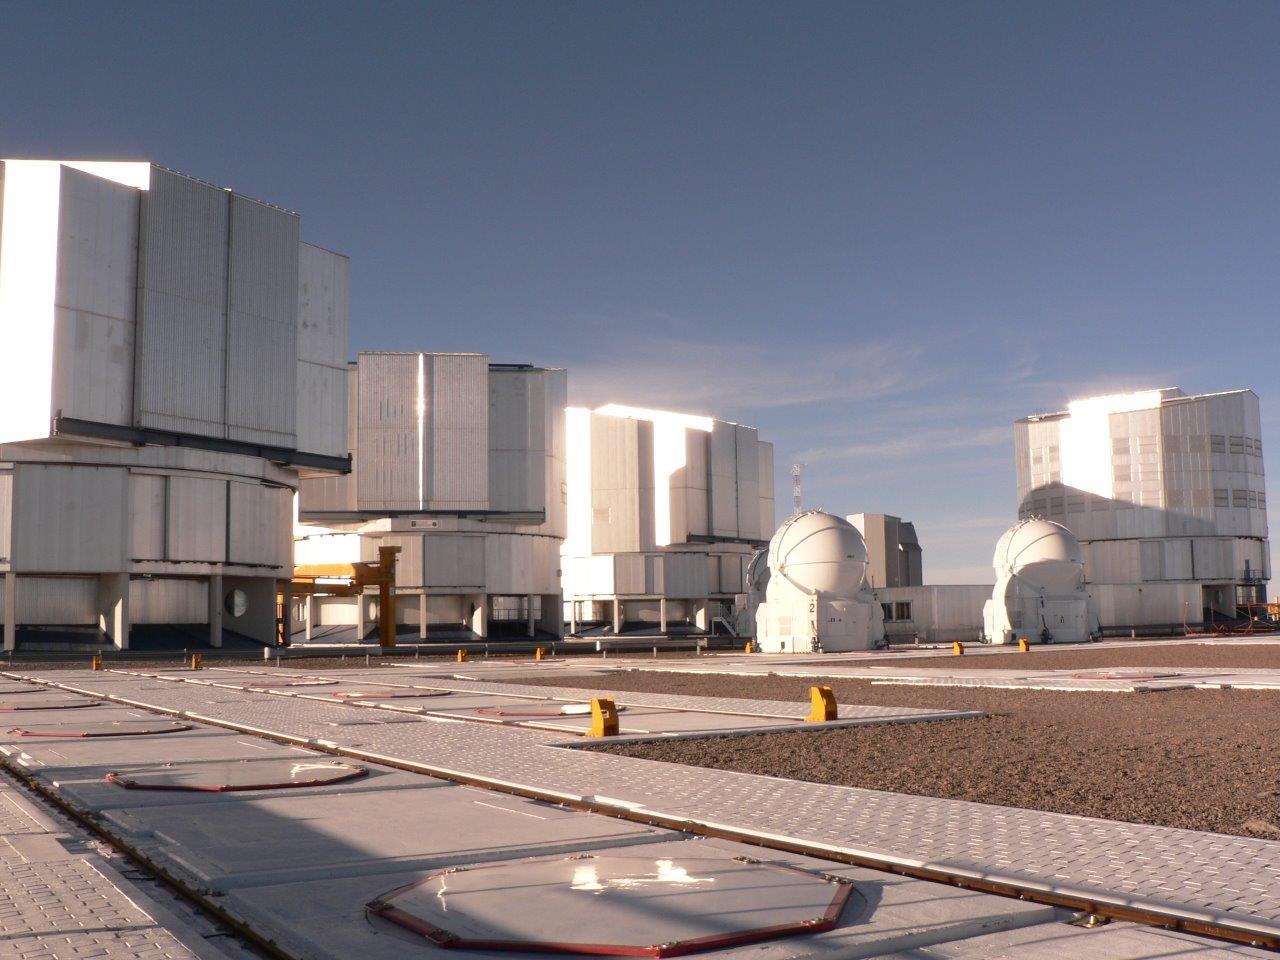 The four domes of the Very Large Telescope on Mount Paranal